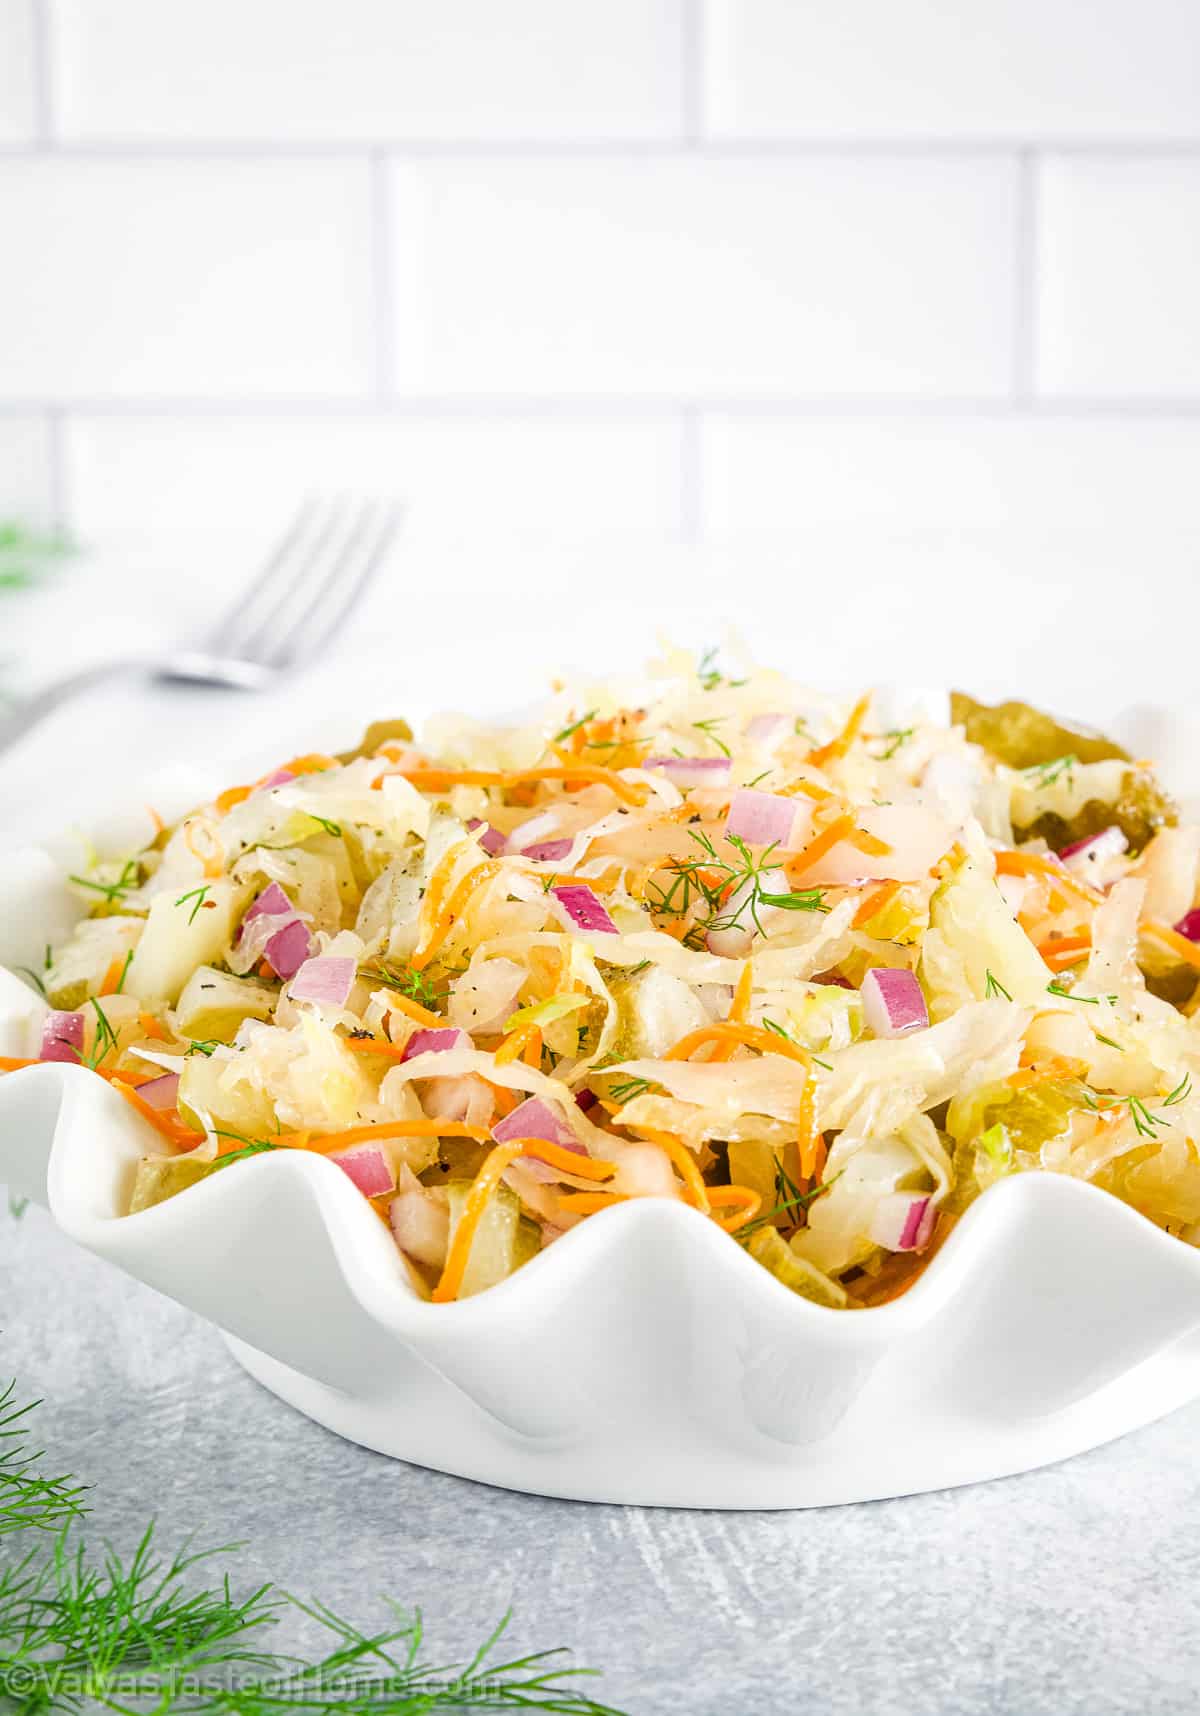 Sauerkraut salad is a delicious salad recipe that features sauerkraut as the main ingredient that offers a tasty flavor that’s unlike anything else.